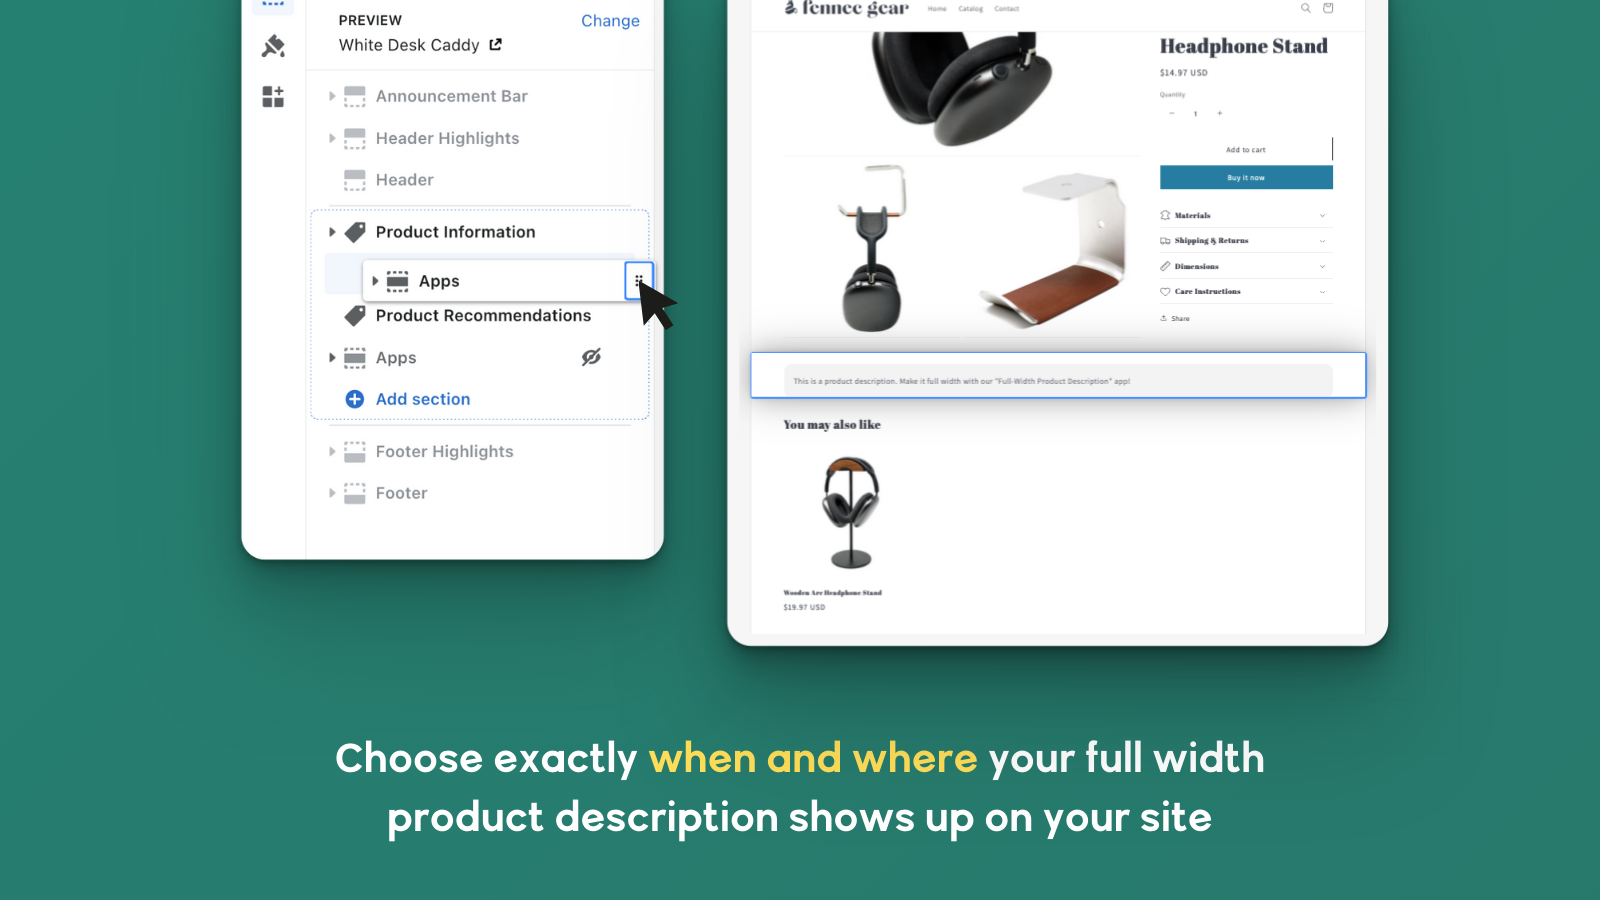 Choose exactly when and where your product description shows up.